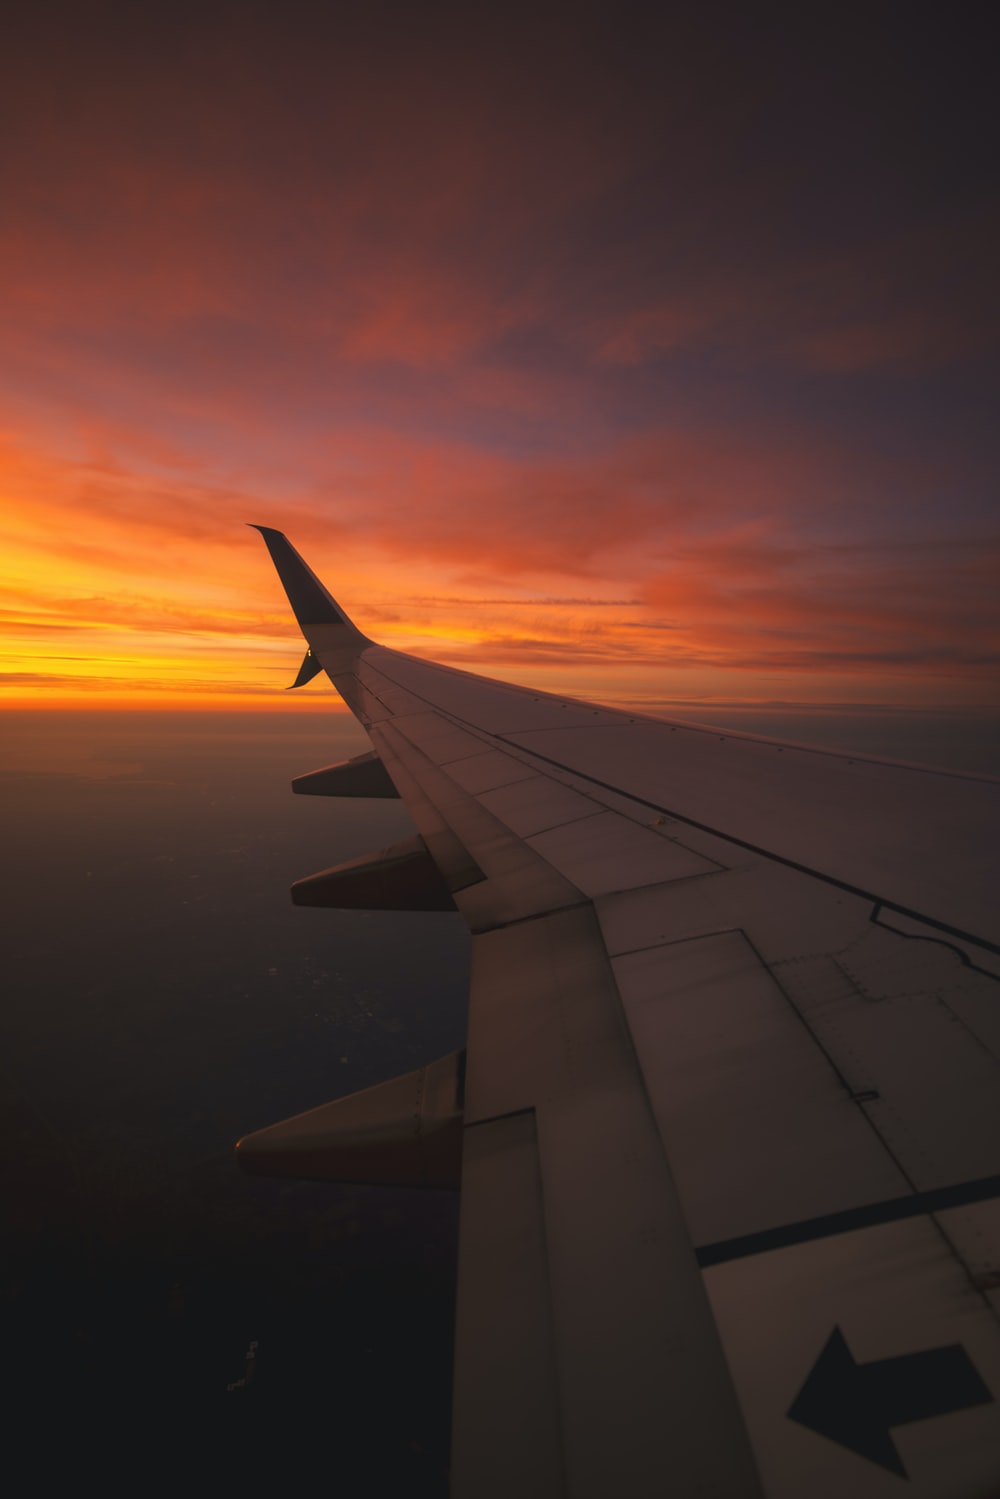 Plane Sunset Picture. Download Free Image